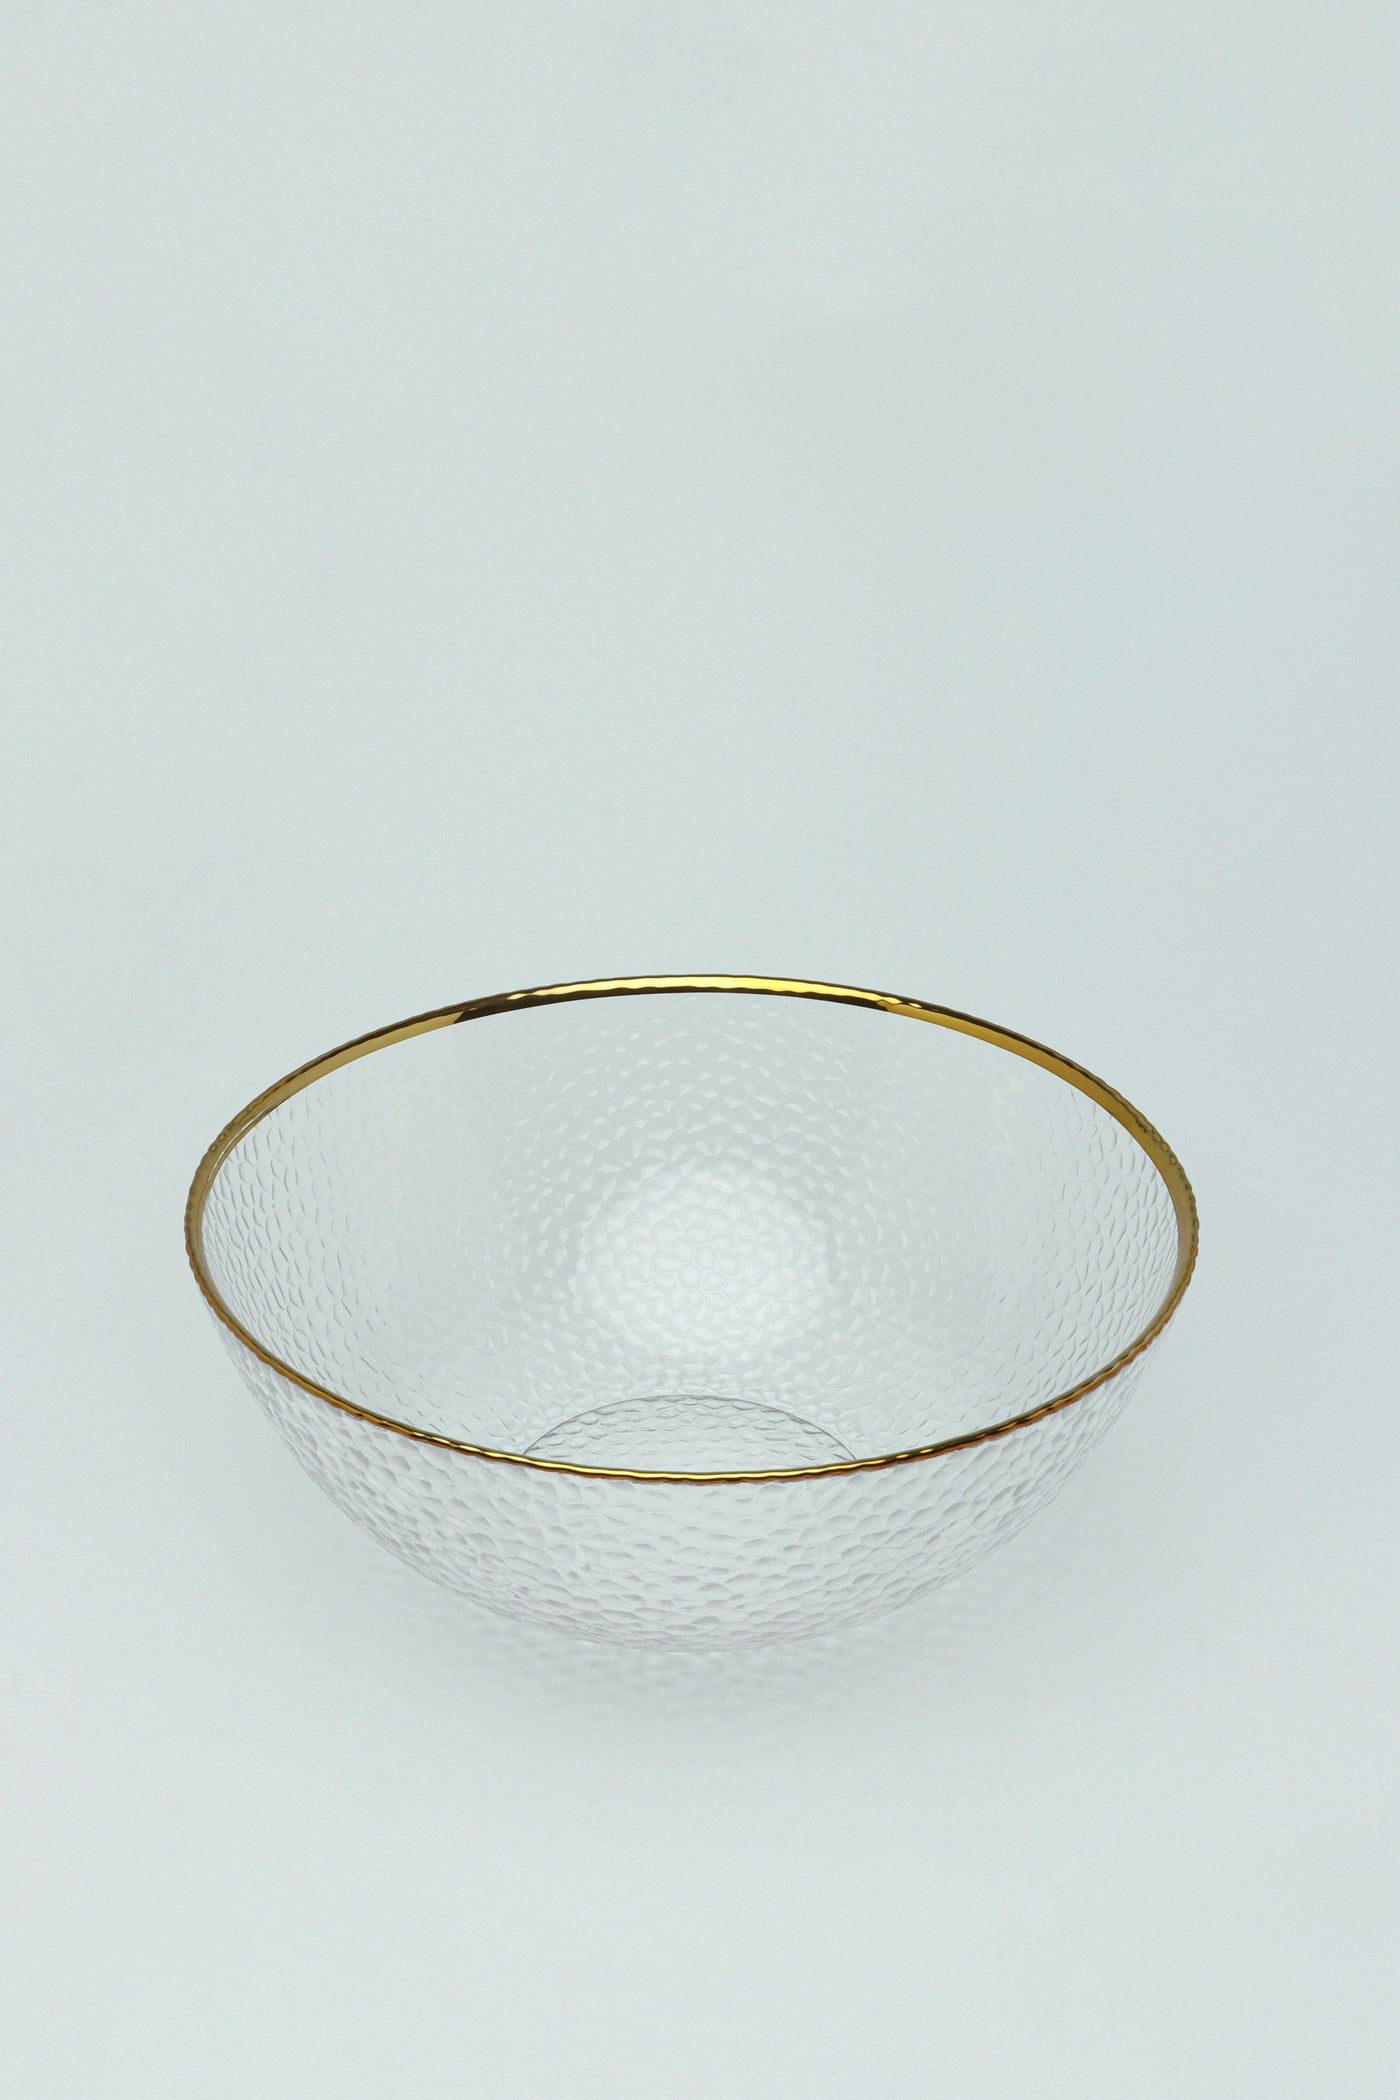 G Decor Bowls Clear Thalia Hammered Textured Glass Gold Rim Large Serving Bowl